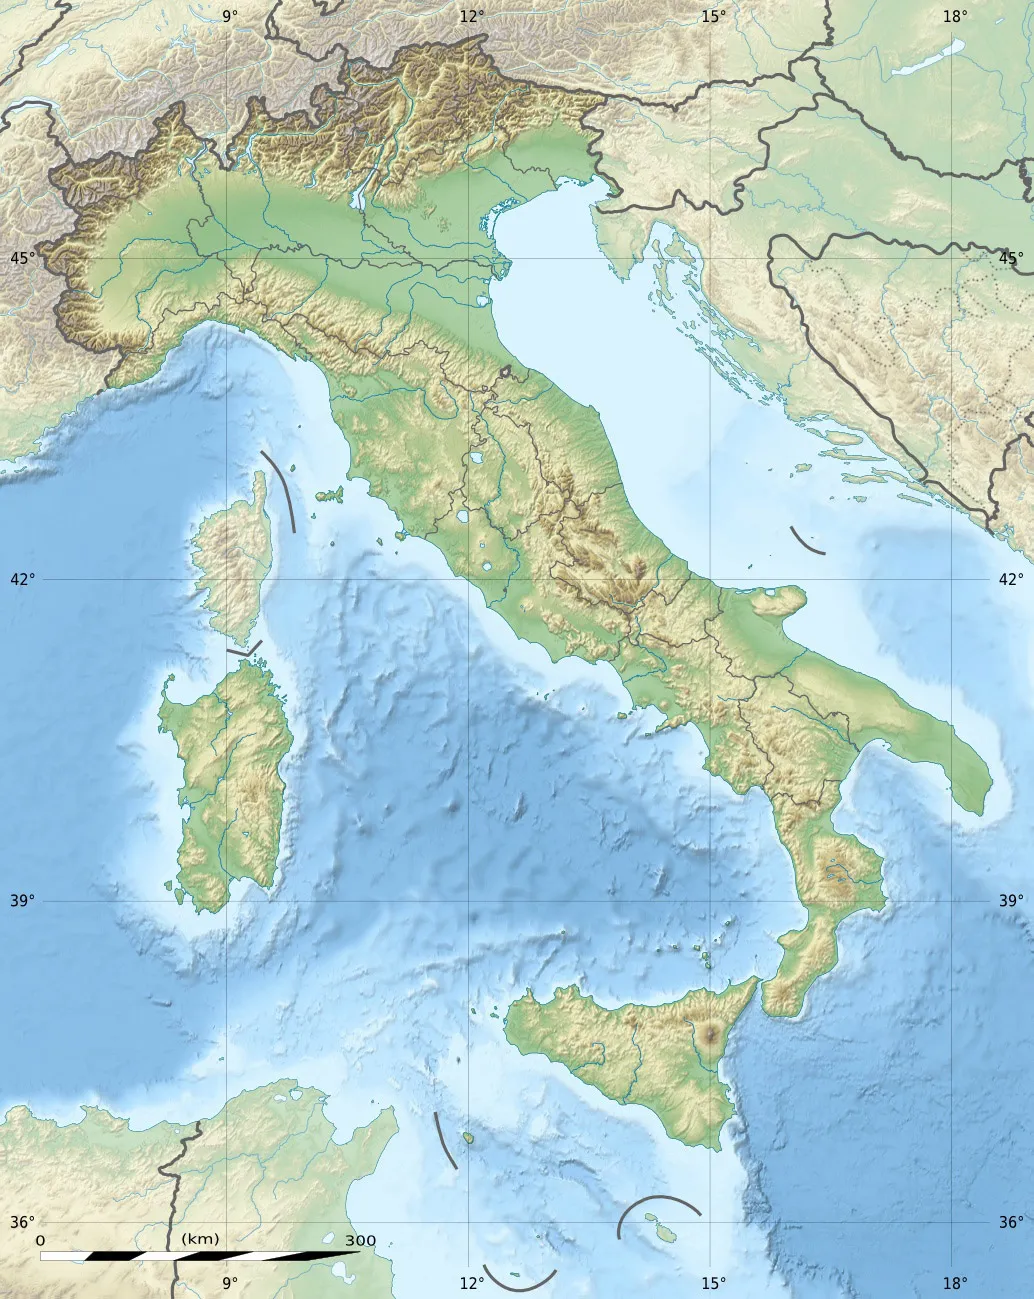 Photo showing: Blank physical map of Italy including the 08-2009 modification of the boundary between Emilia-Romagna and Marche regions, for geo-location purpose.